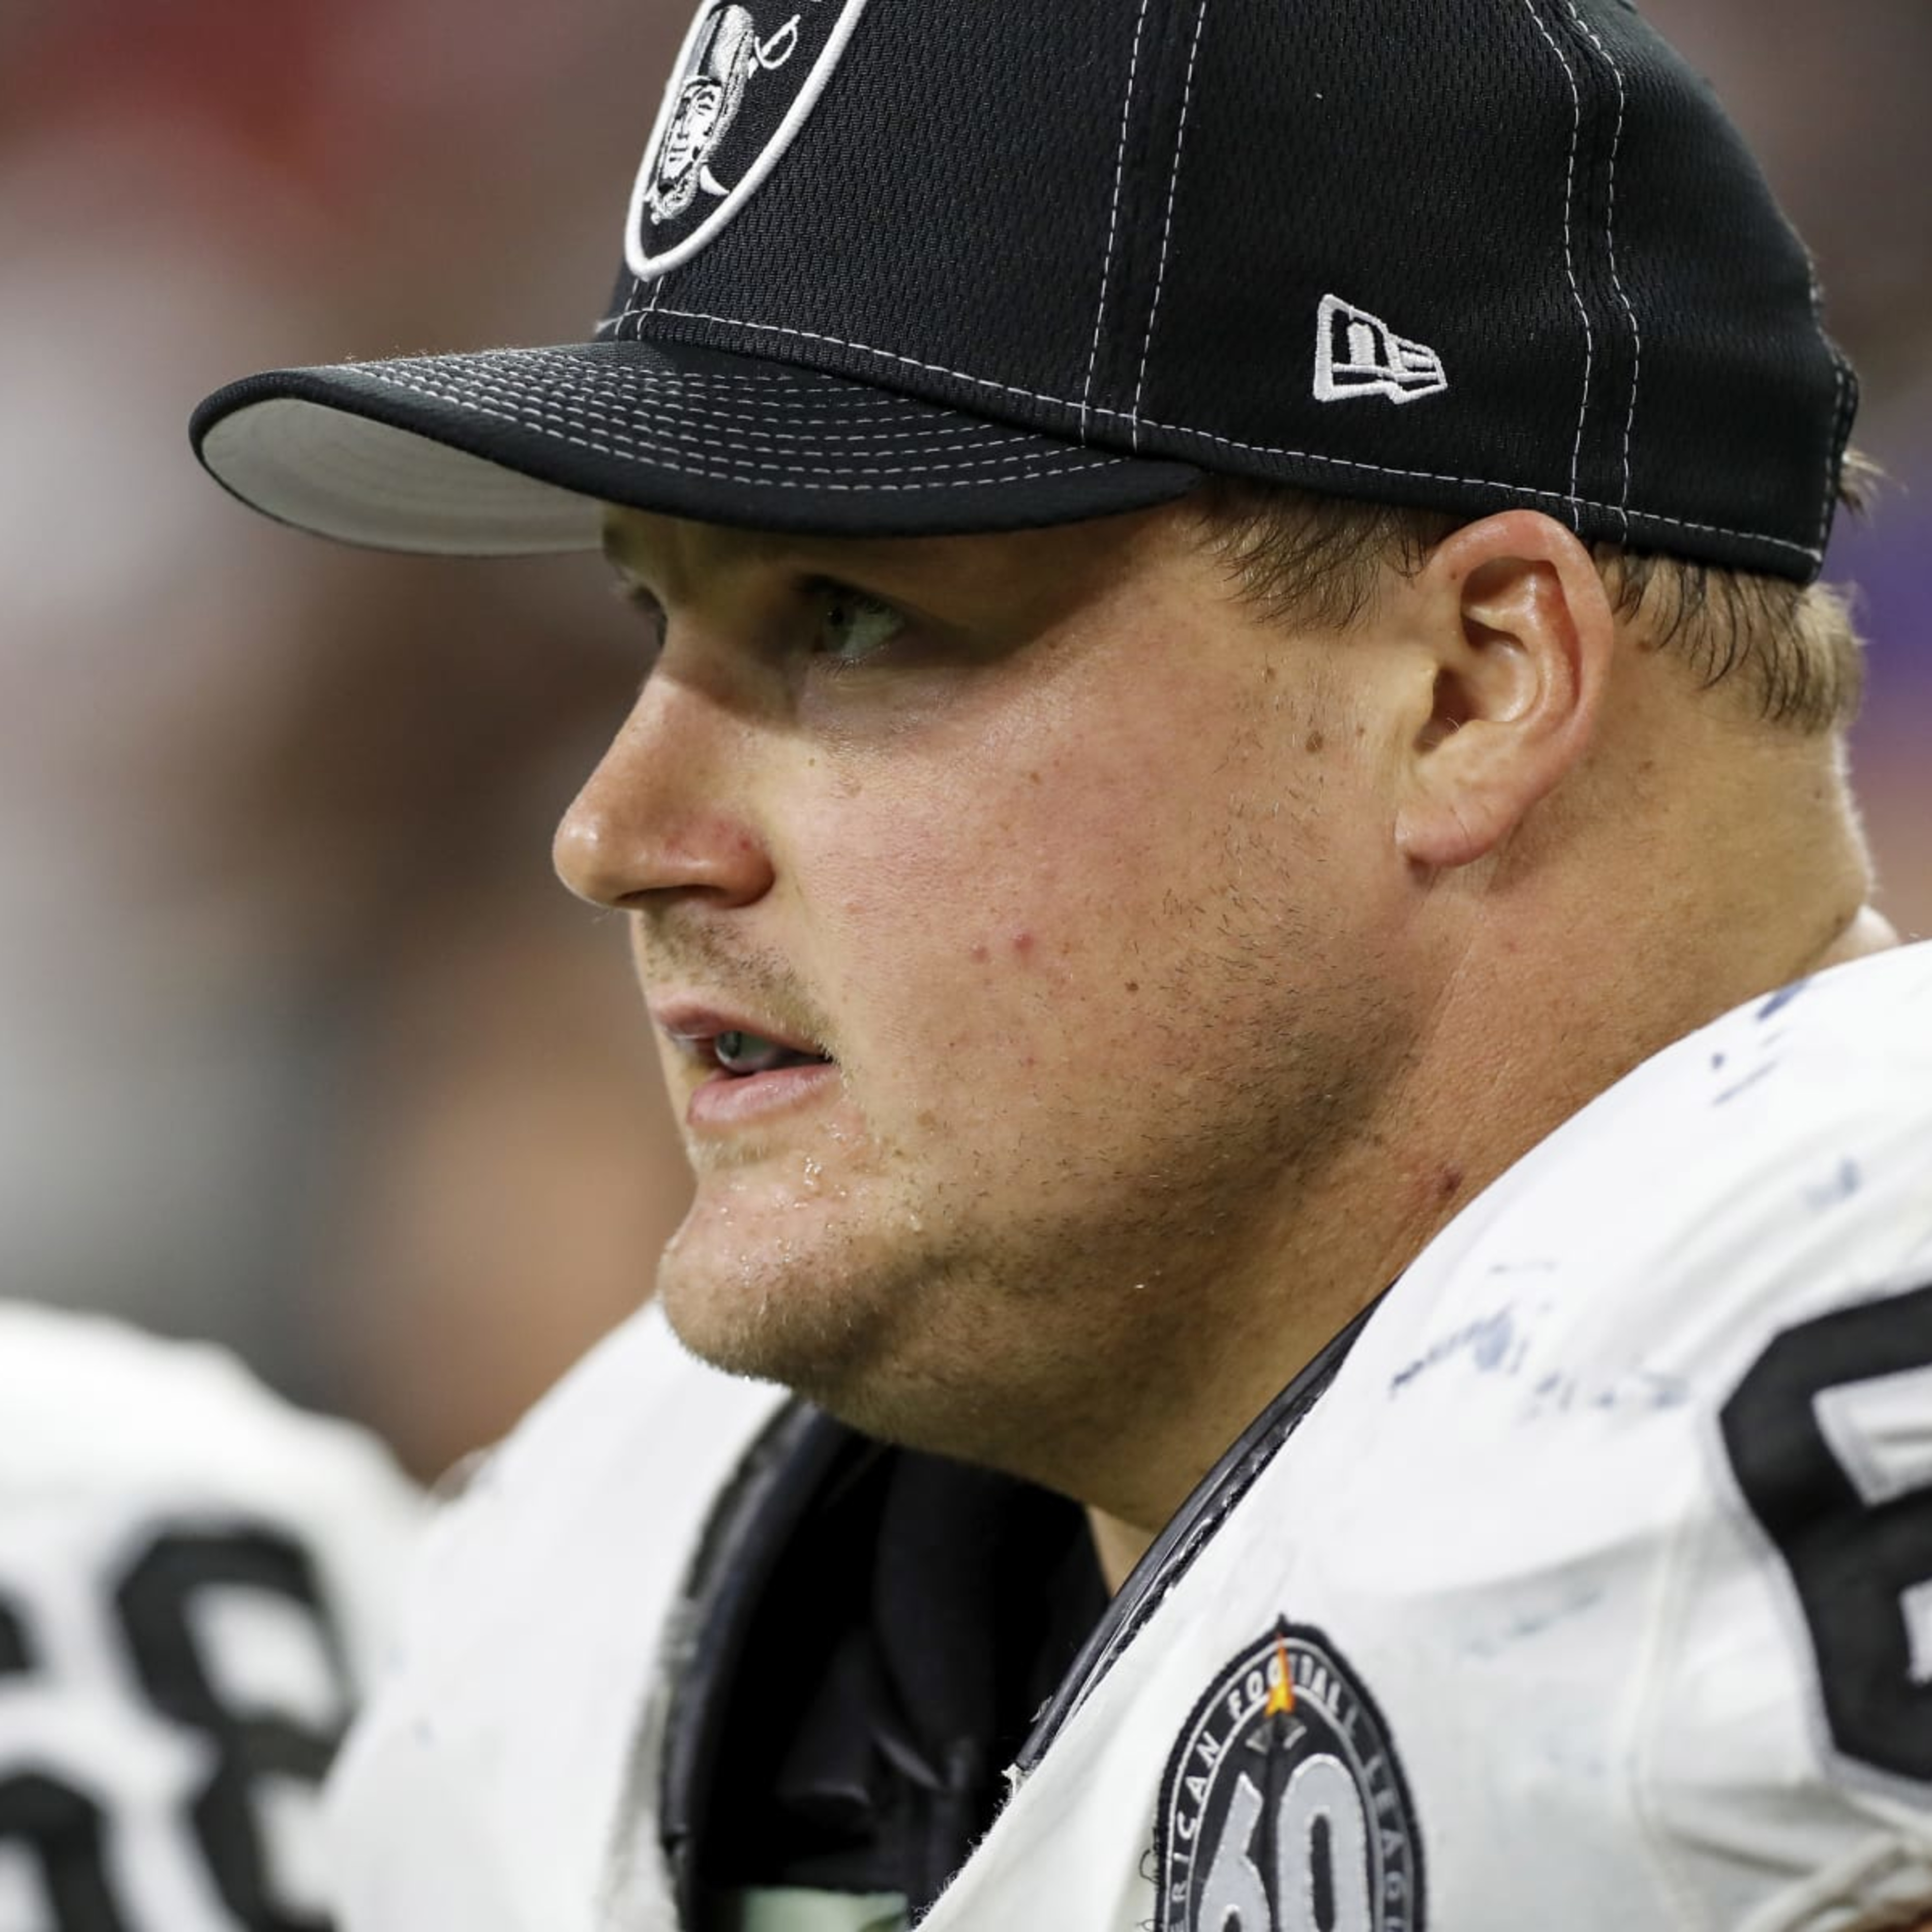 Richie Incognito Announces NFL Retirement After Stints with Raiders, Dolphins, More